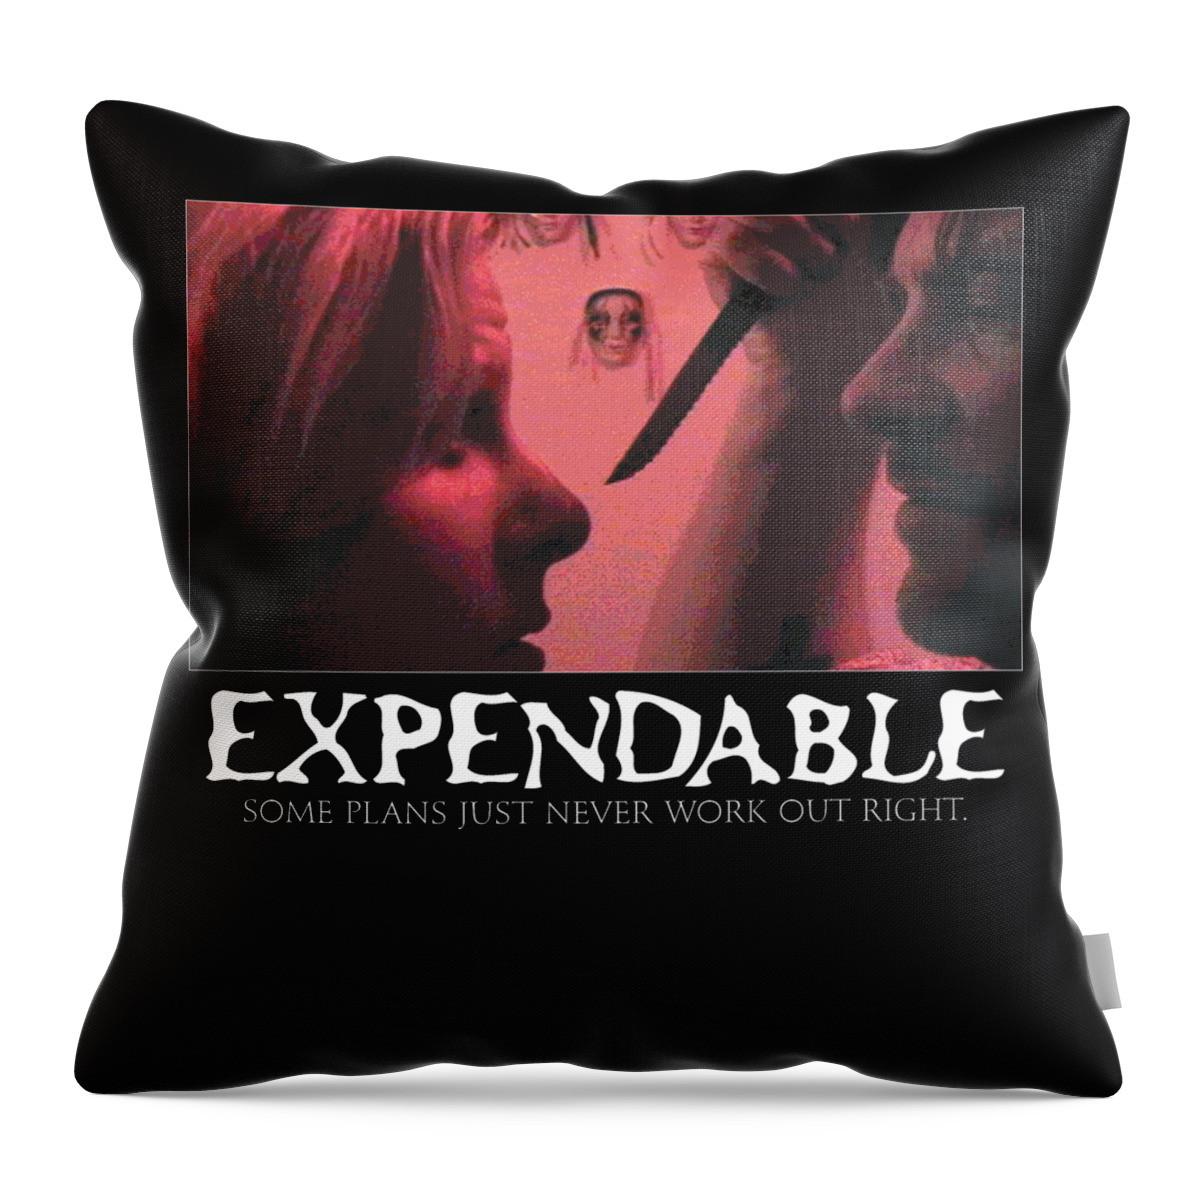 Movie Throw Pillow featuring the digital art Expendable 9 by Mark Baranowski